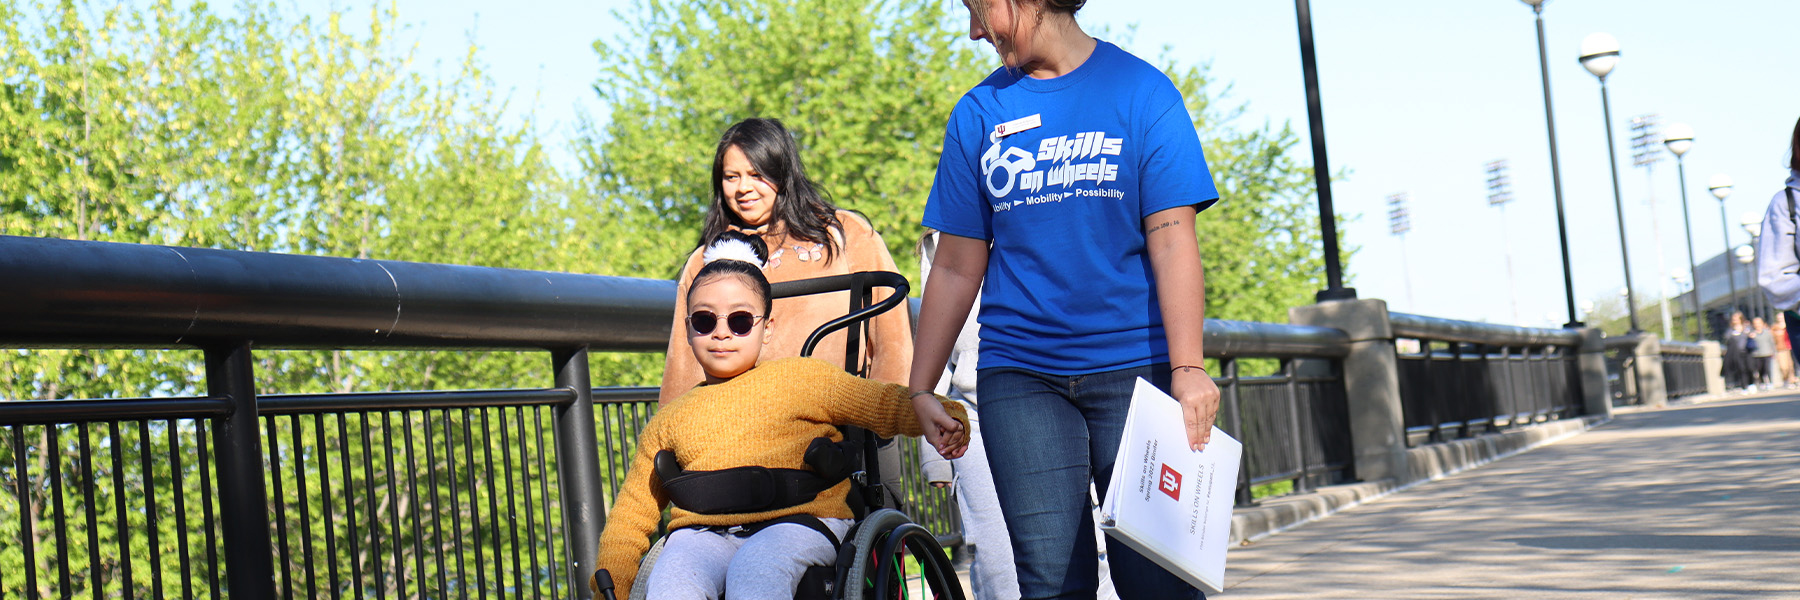 A student walking with a community member participating in Skills on Wheels